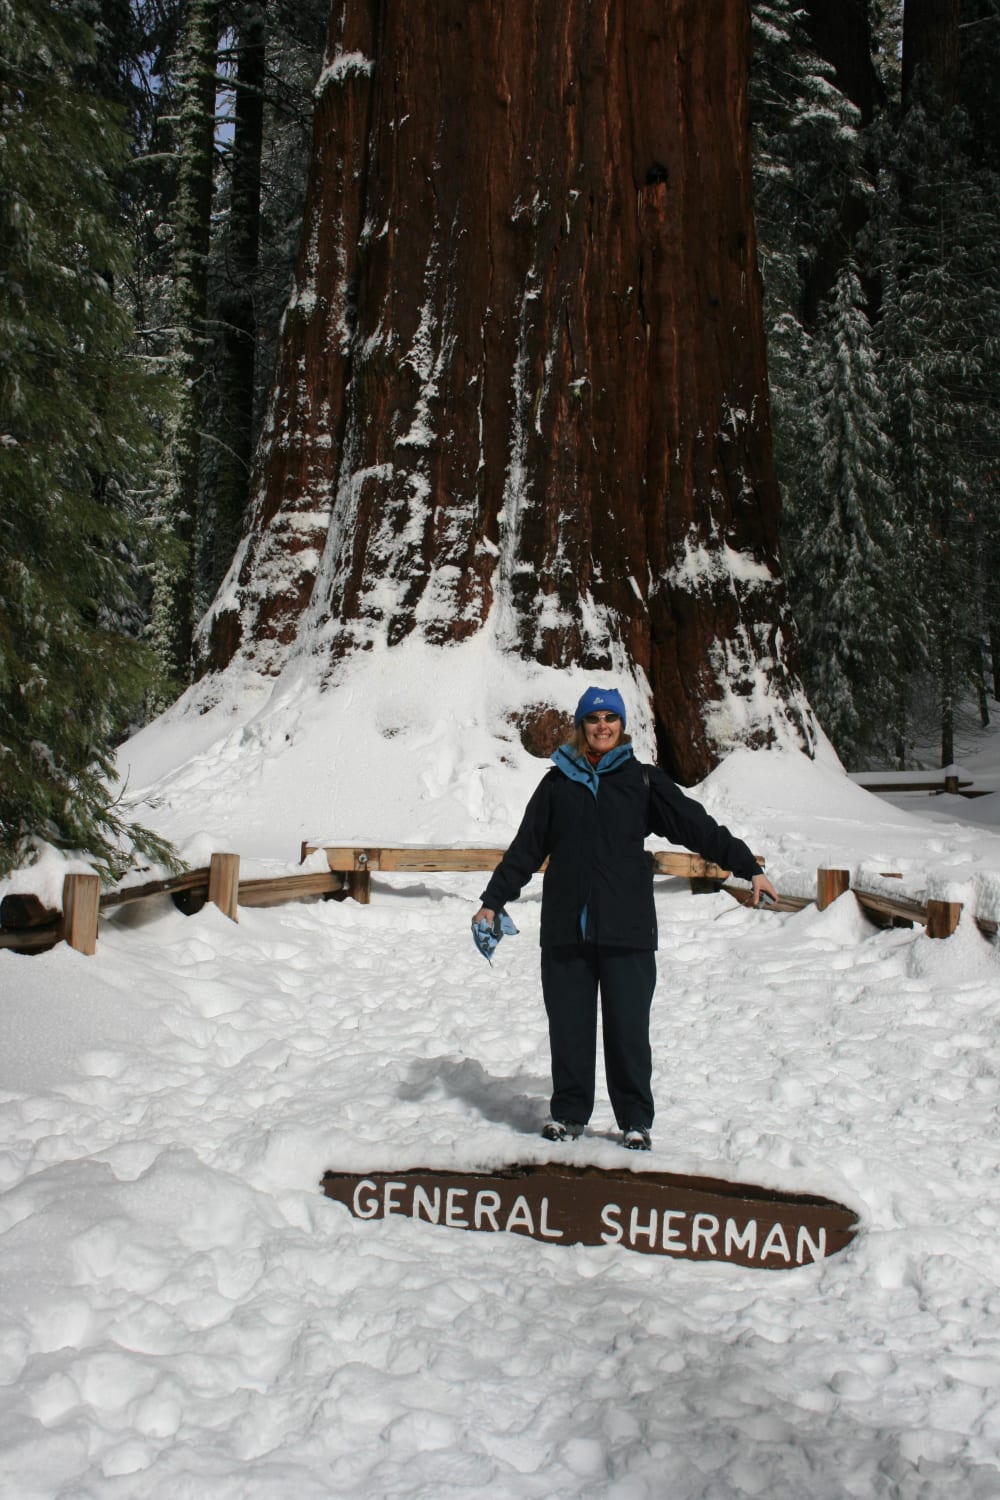 The bottom of General Sherman, Sequoia National Park